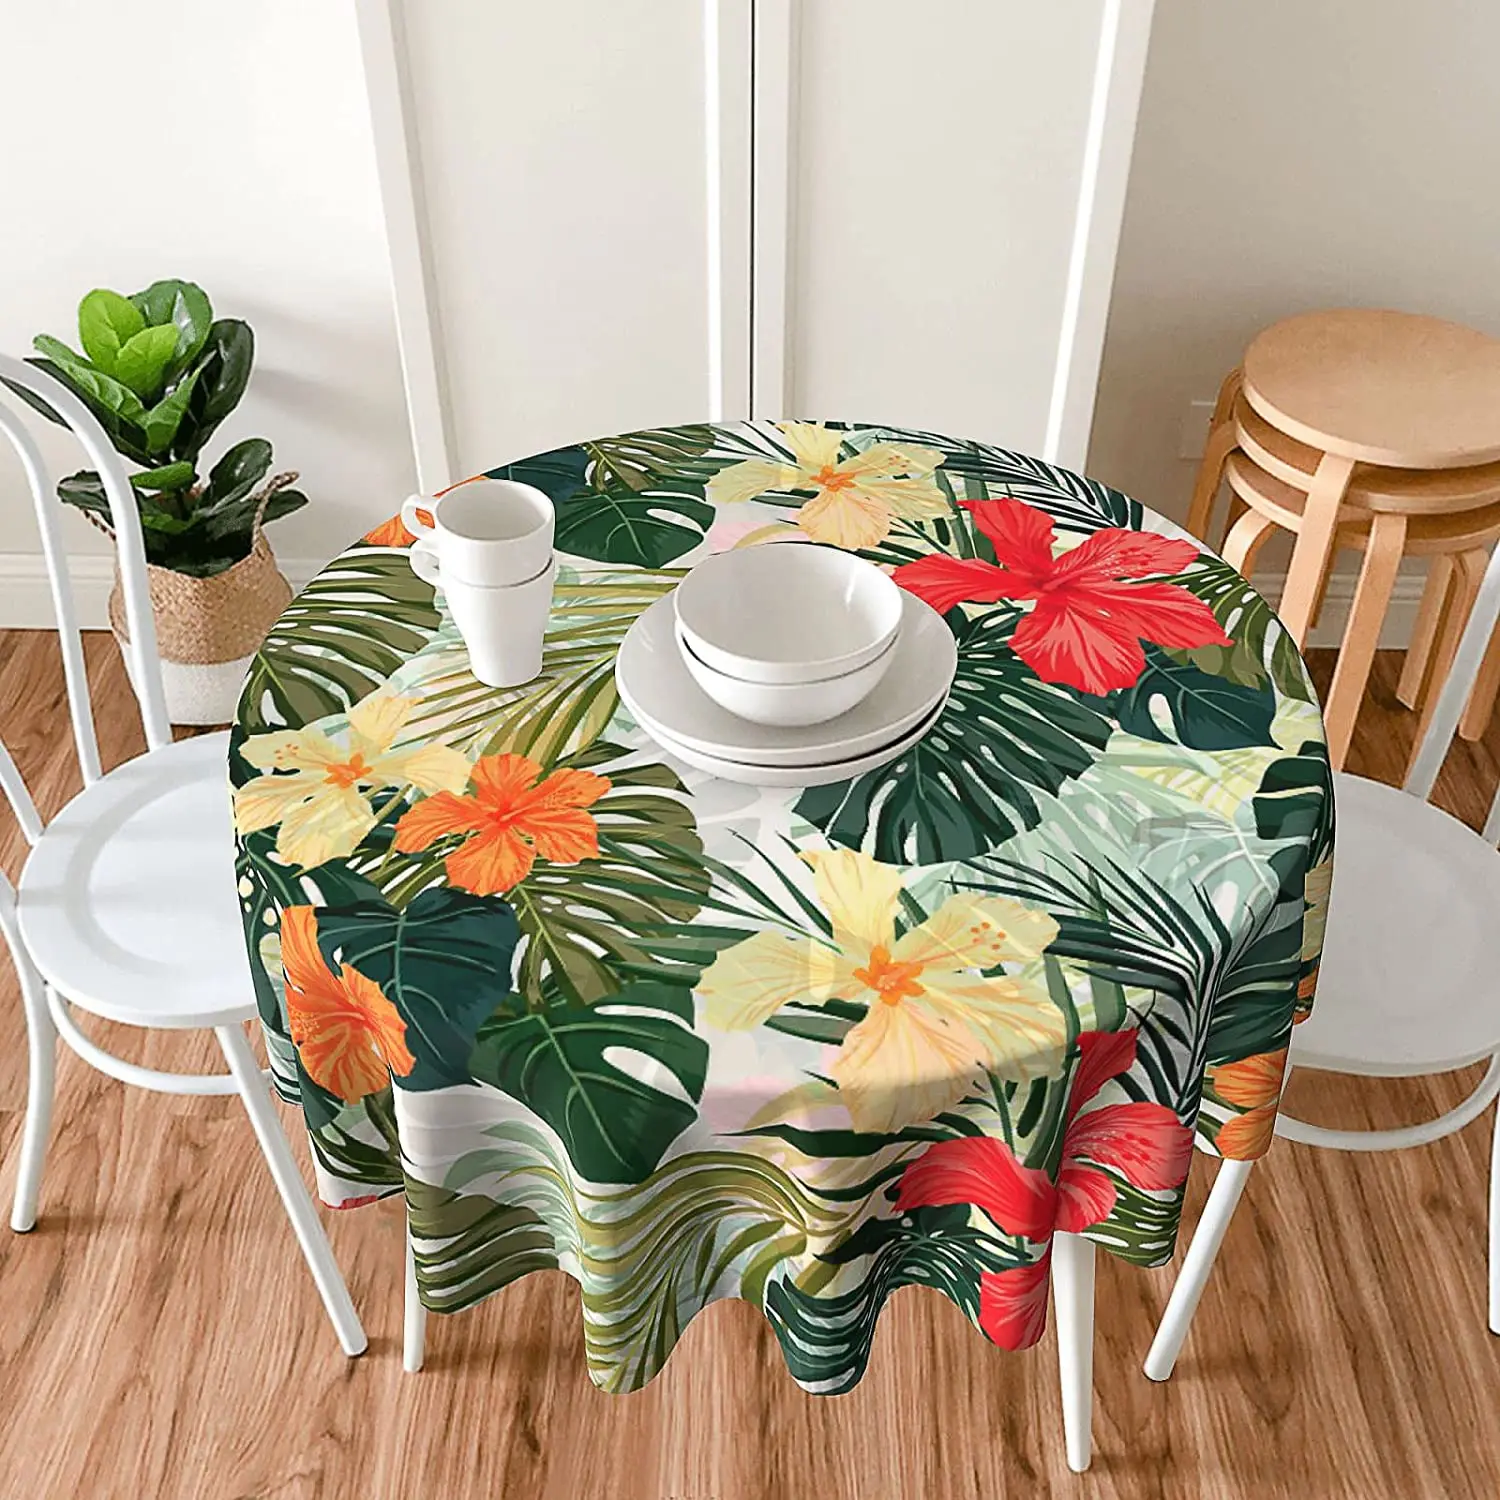 

Hawaiian Palm Tropical Tablecloth Round Waterproof Summer Plants Hibiscus Flowers Leaf Table Cloth for Picnic Party Holiday Home